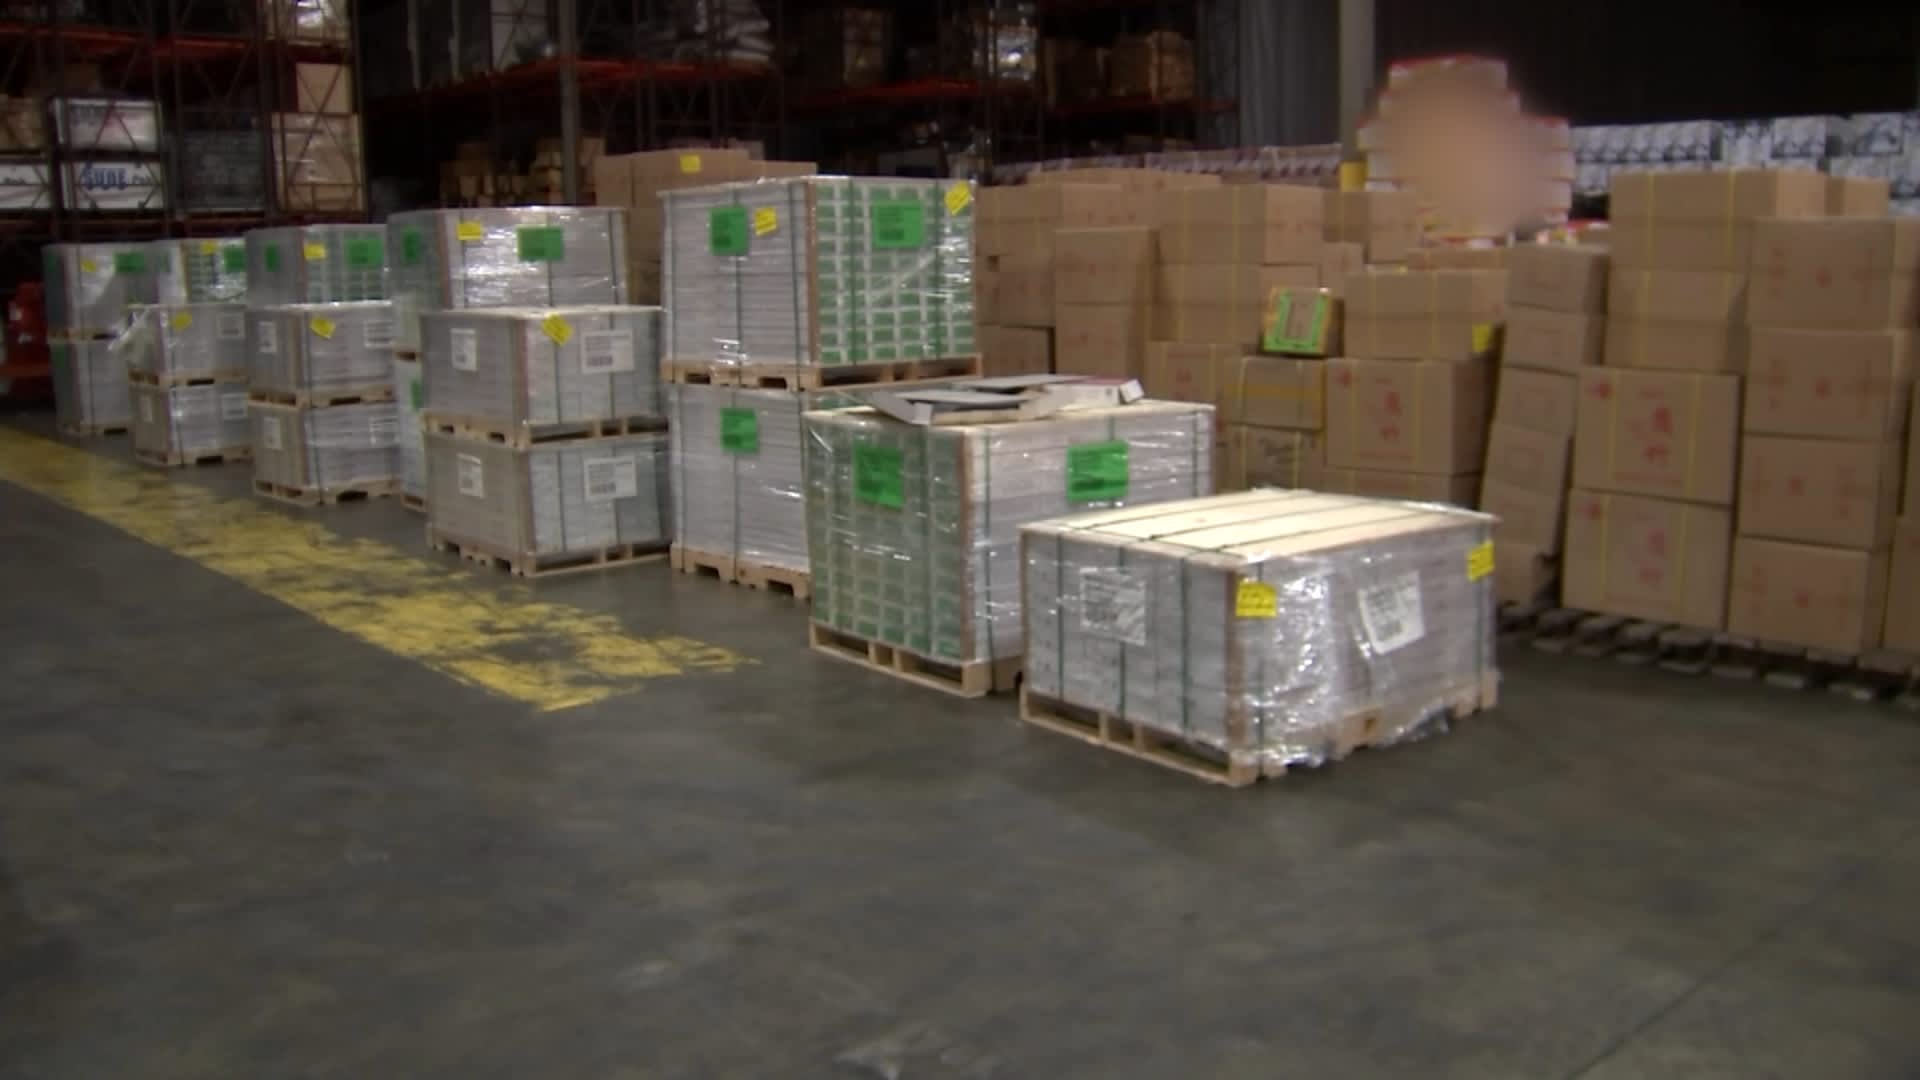 During CNBC's port visit, a 40-foot shipping container full of floor tiles (white boxes) was detained by U.S. Customs & Border Protection over suspected ties to forced labor.